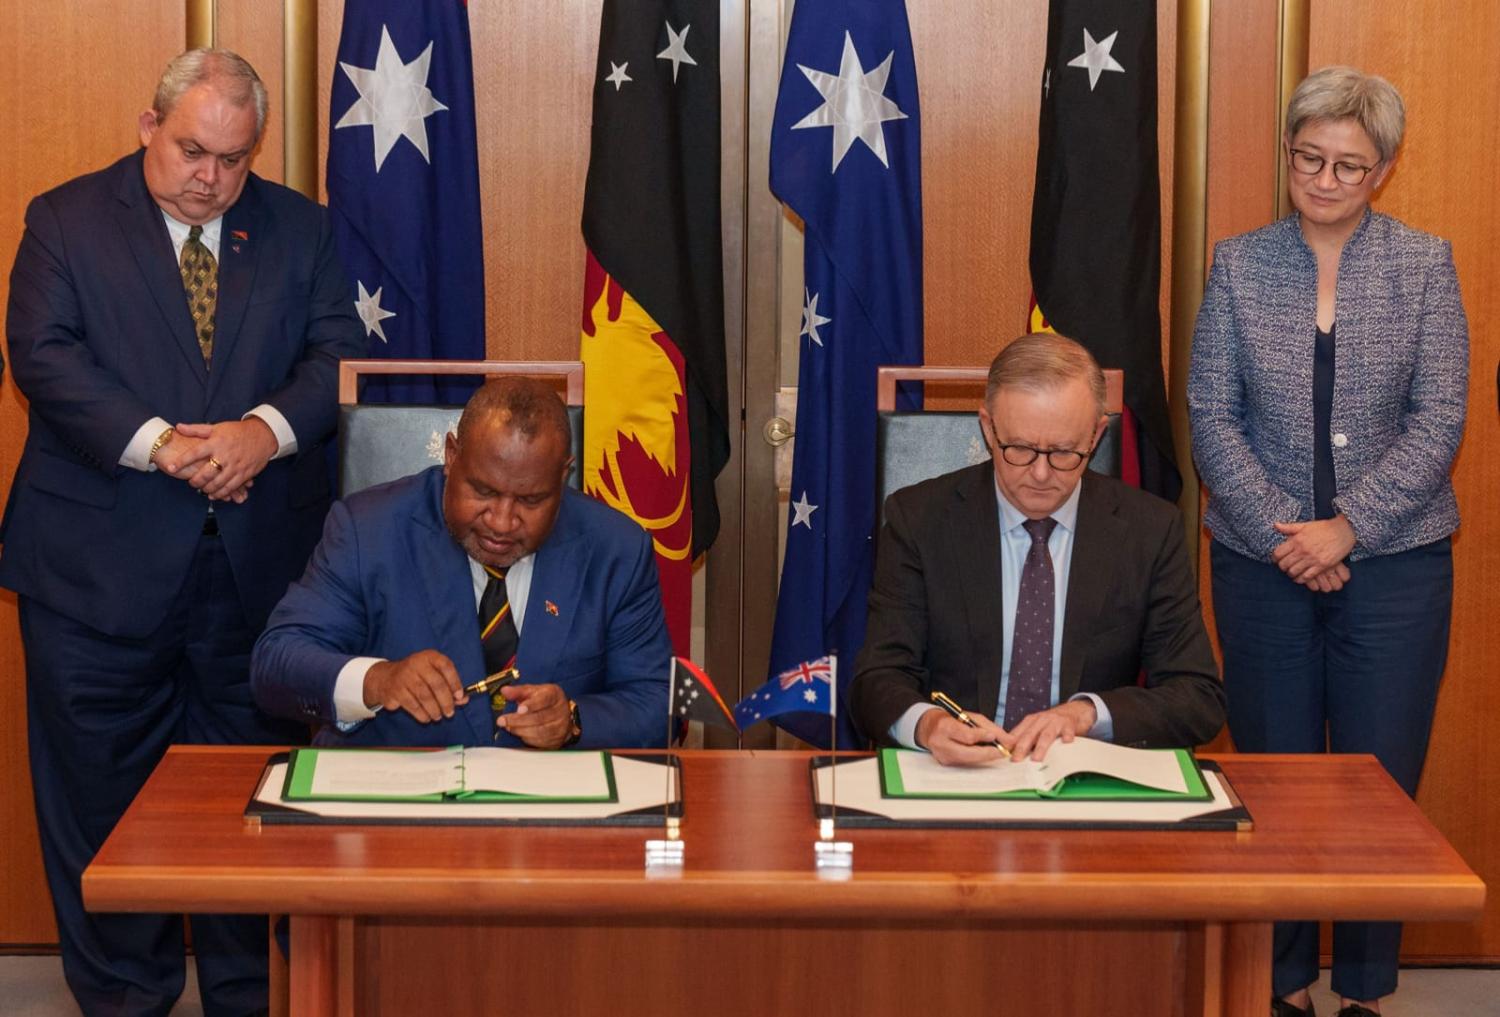 Signing the Australia-PNG bilateral security agreement in Canberra, 7 December (@AlboMP/X)